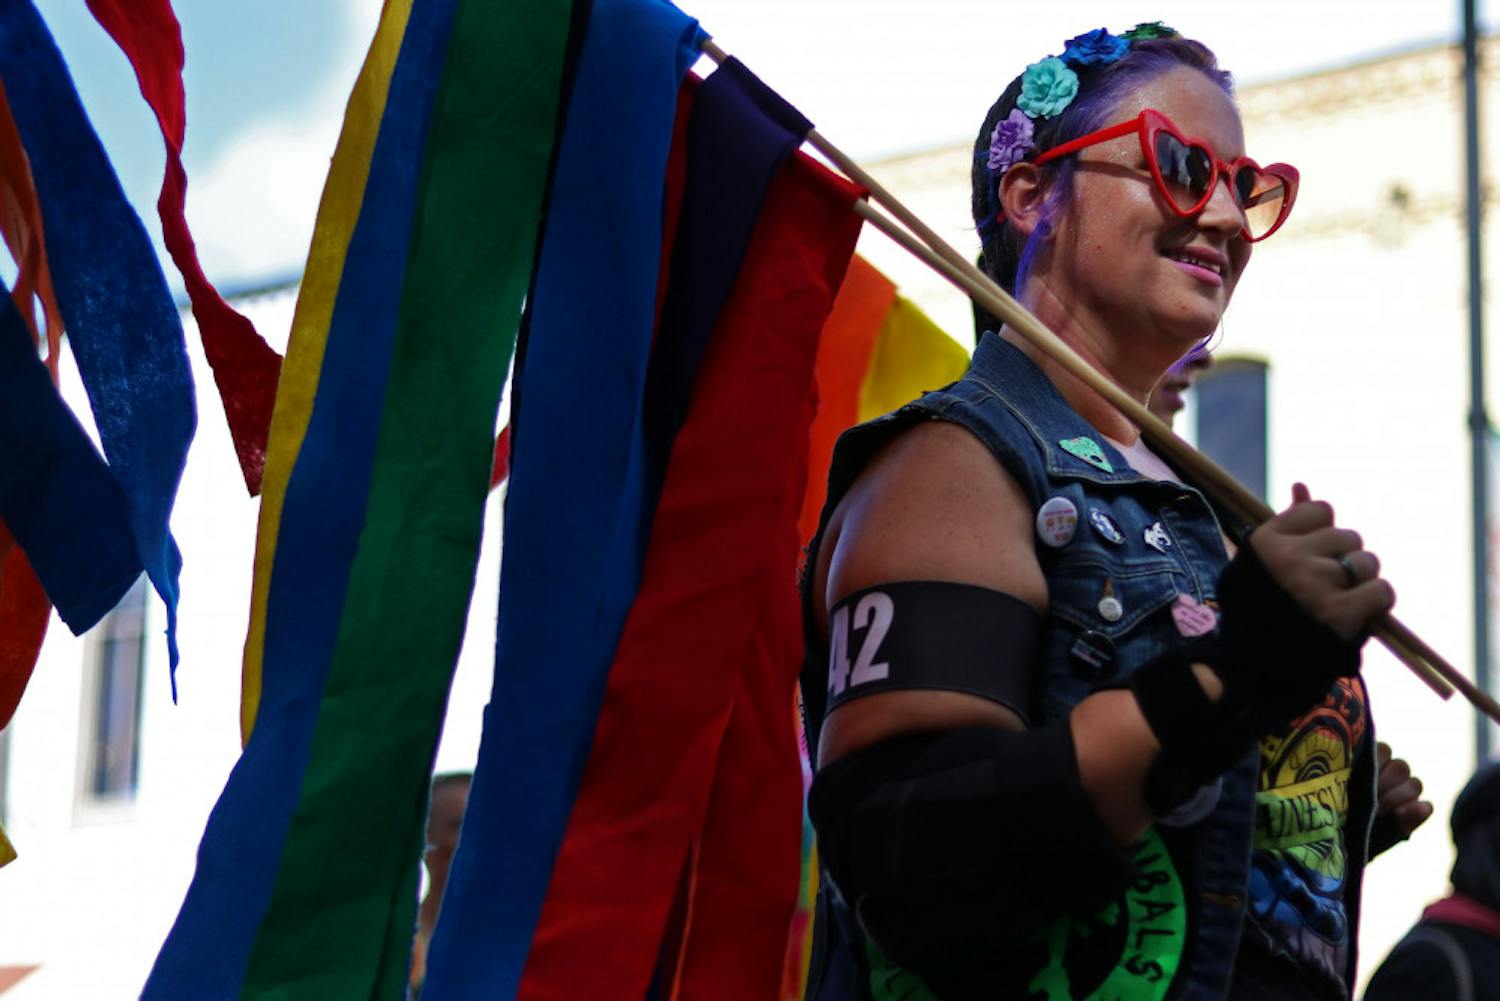 Jackie Korpela, known as Haley’s Vomit, a member of the Ocala Cannibals Roller Derby team, skates Saturday in the Gainesville Pride Parade that marched down University Avenue and ended at Bo Diddley Plaza.Correction: This caption has been updated to reflect the name of Korpela. 